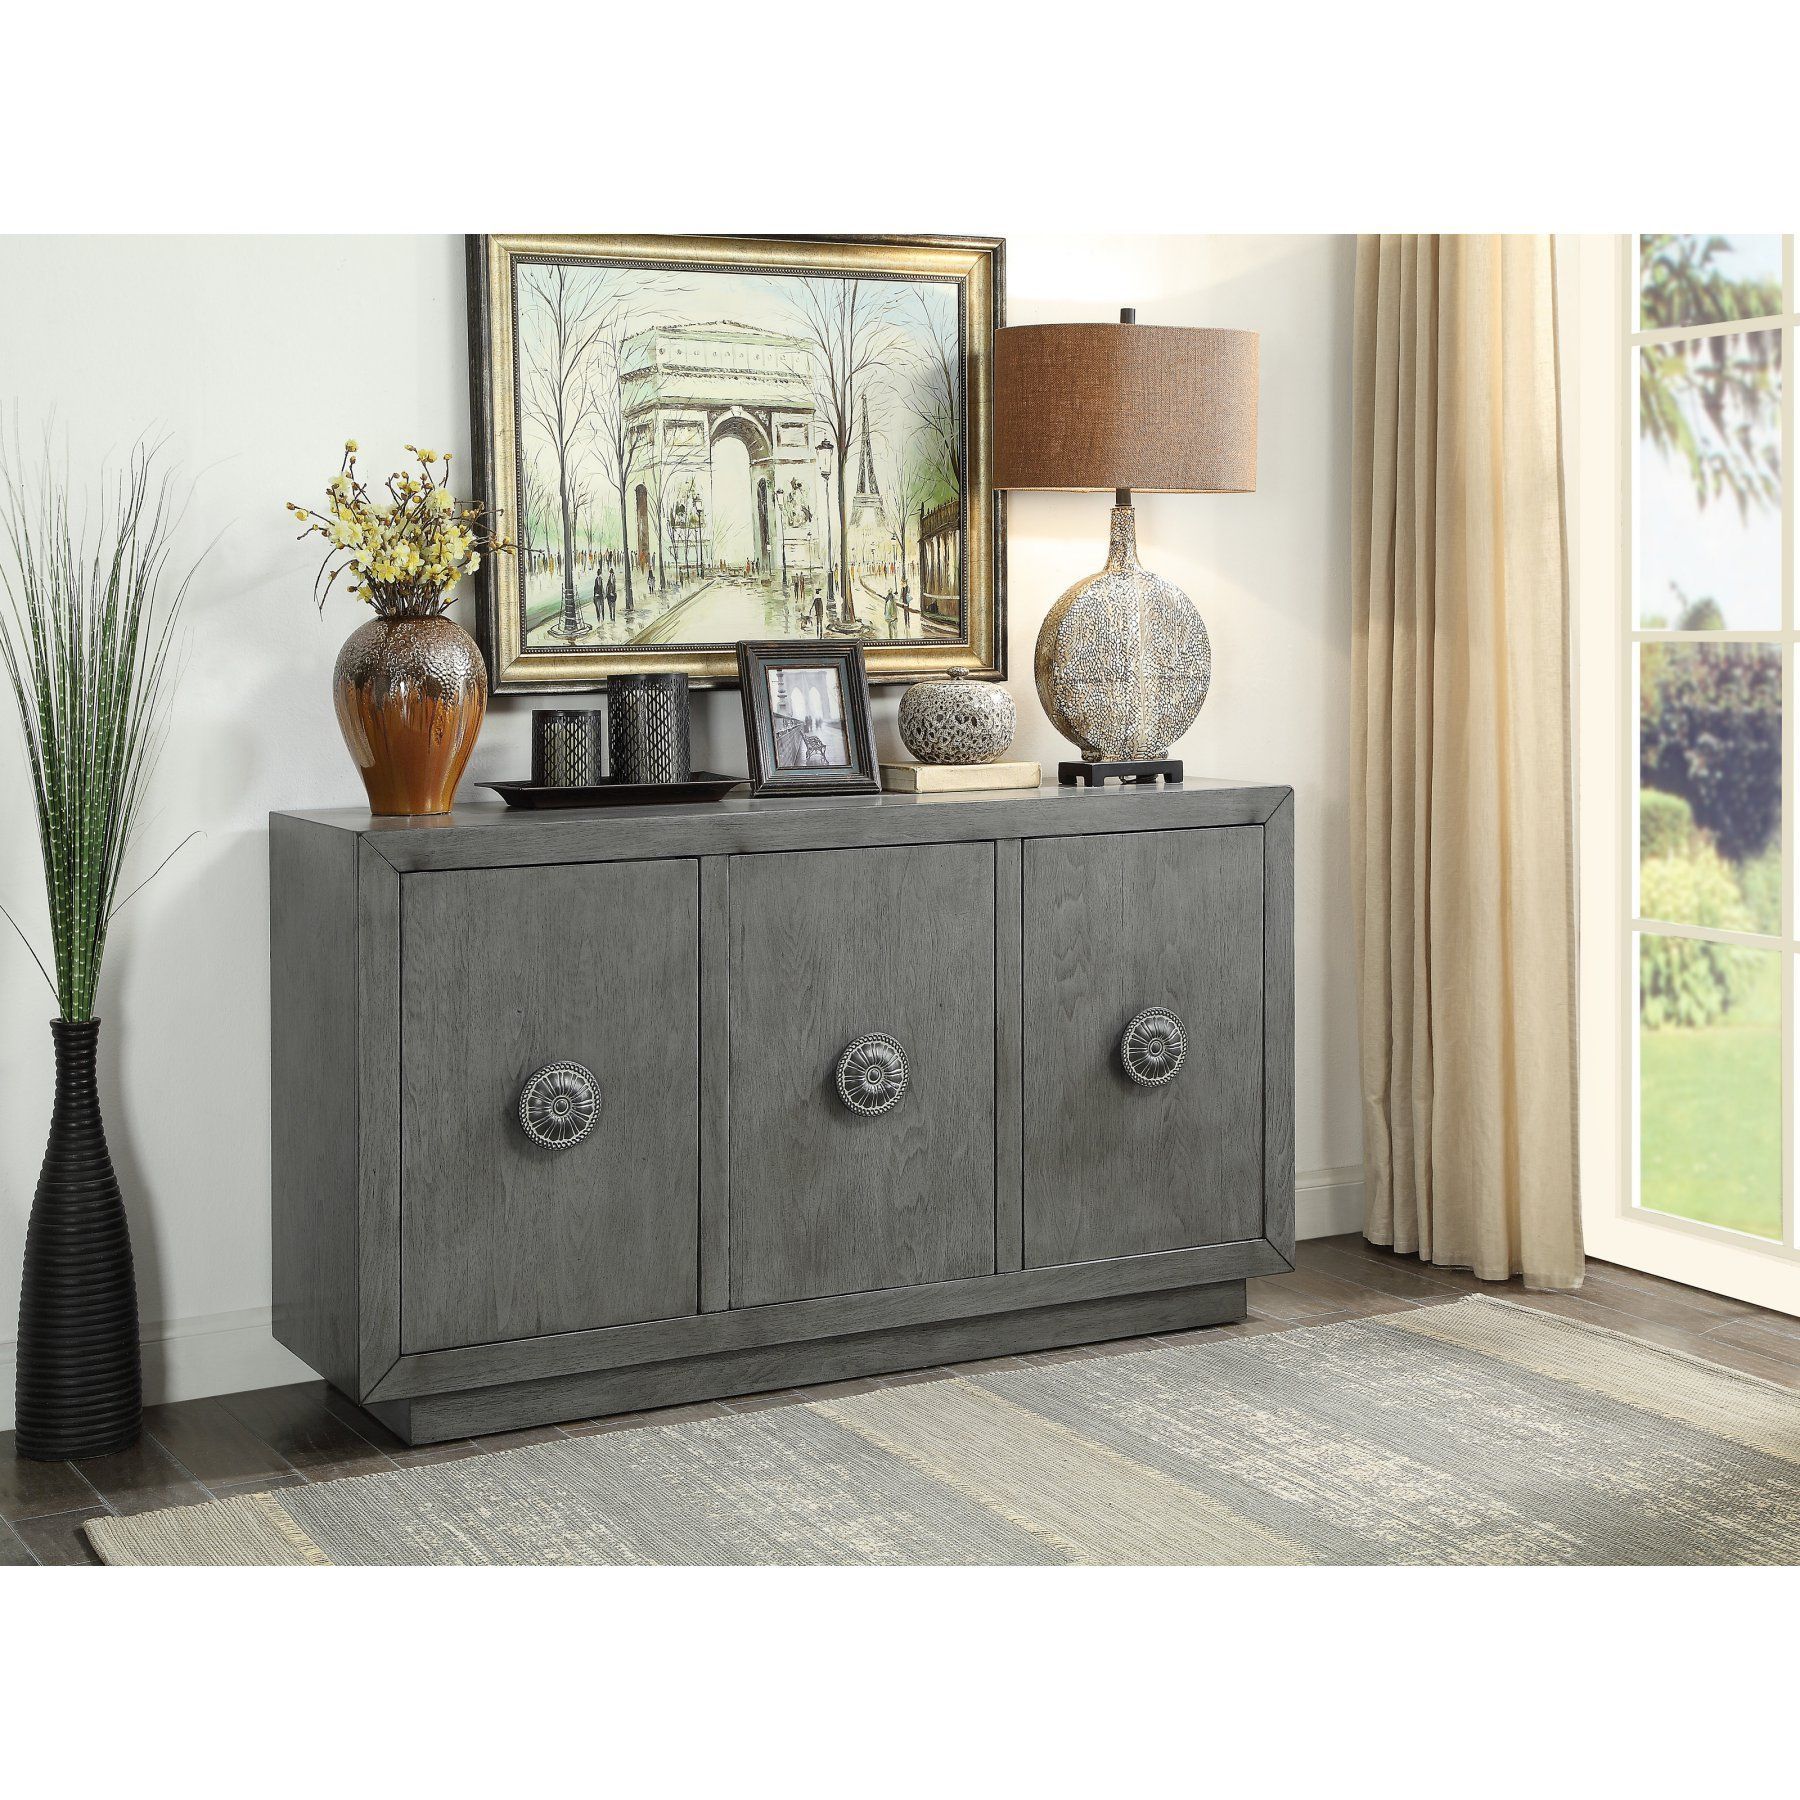 Coast To Coast 3 Door Media Credenza – 22525 | Products For Most Up To Date Errol Media Credenzas (View 17 of 20)